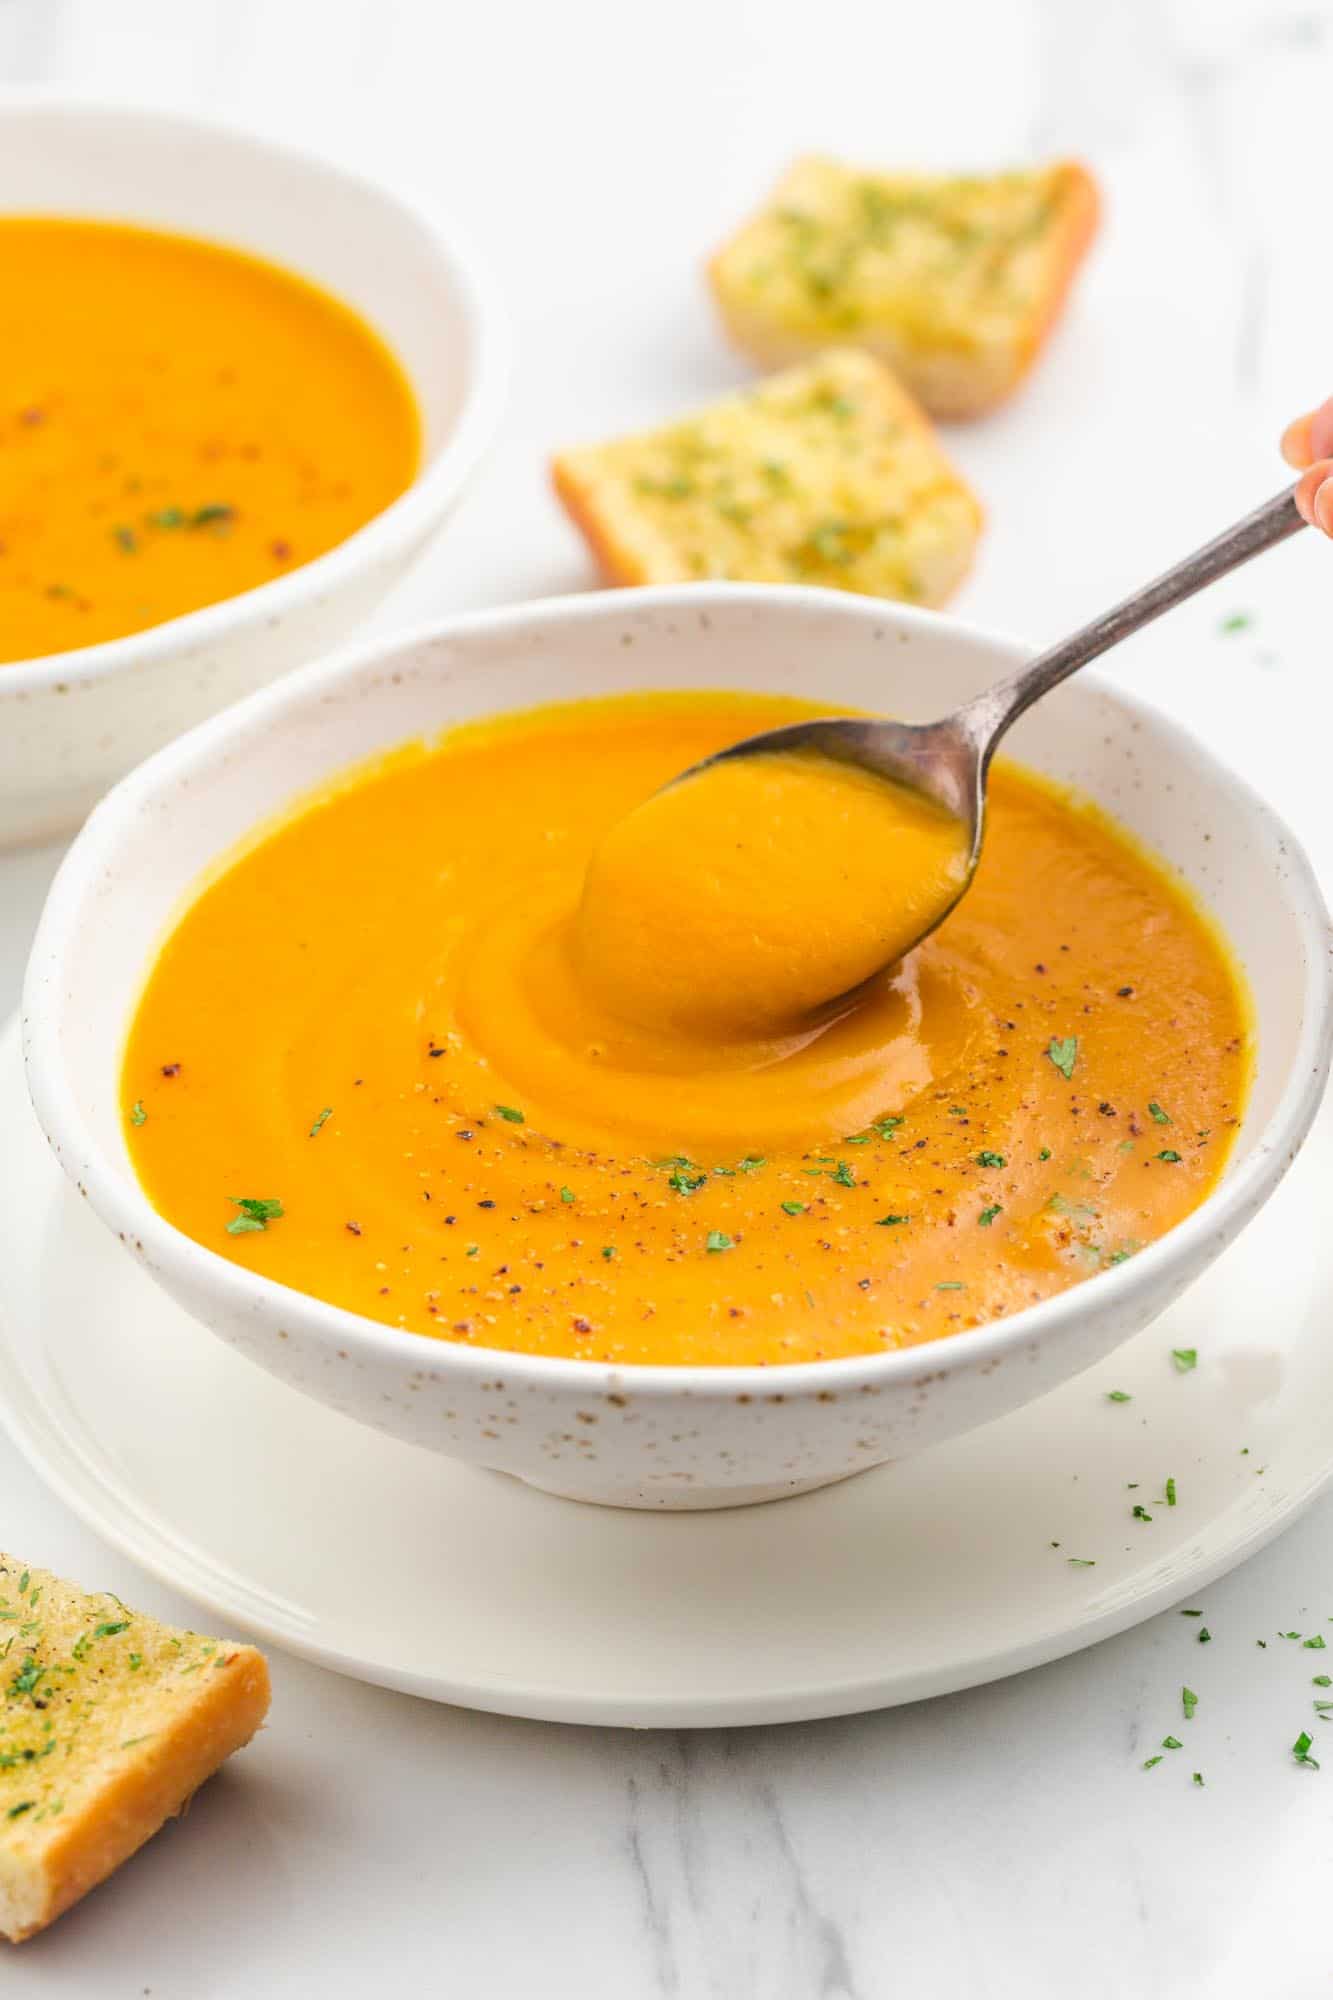 Taking a spoonful of the sweet potato soup in a white bowl